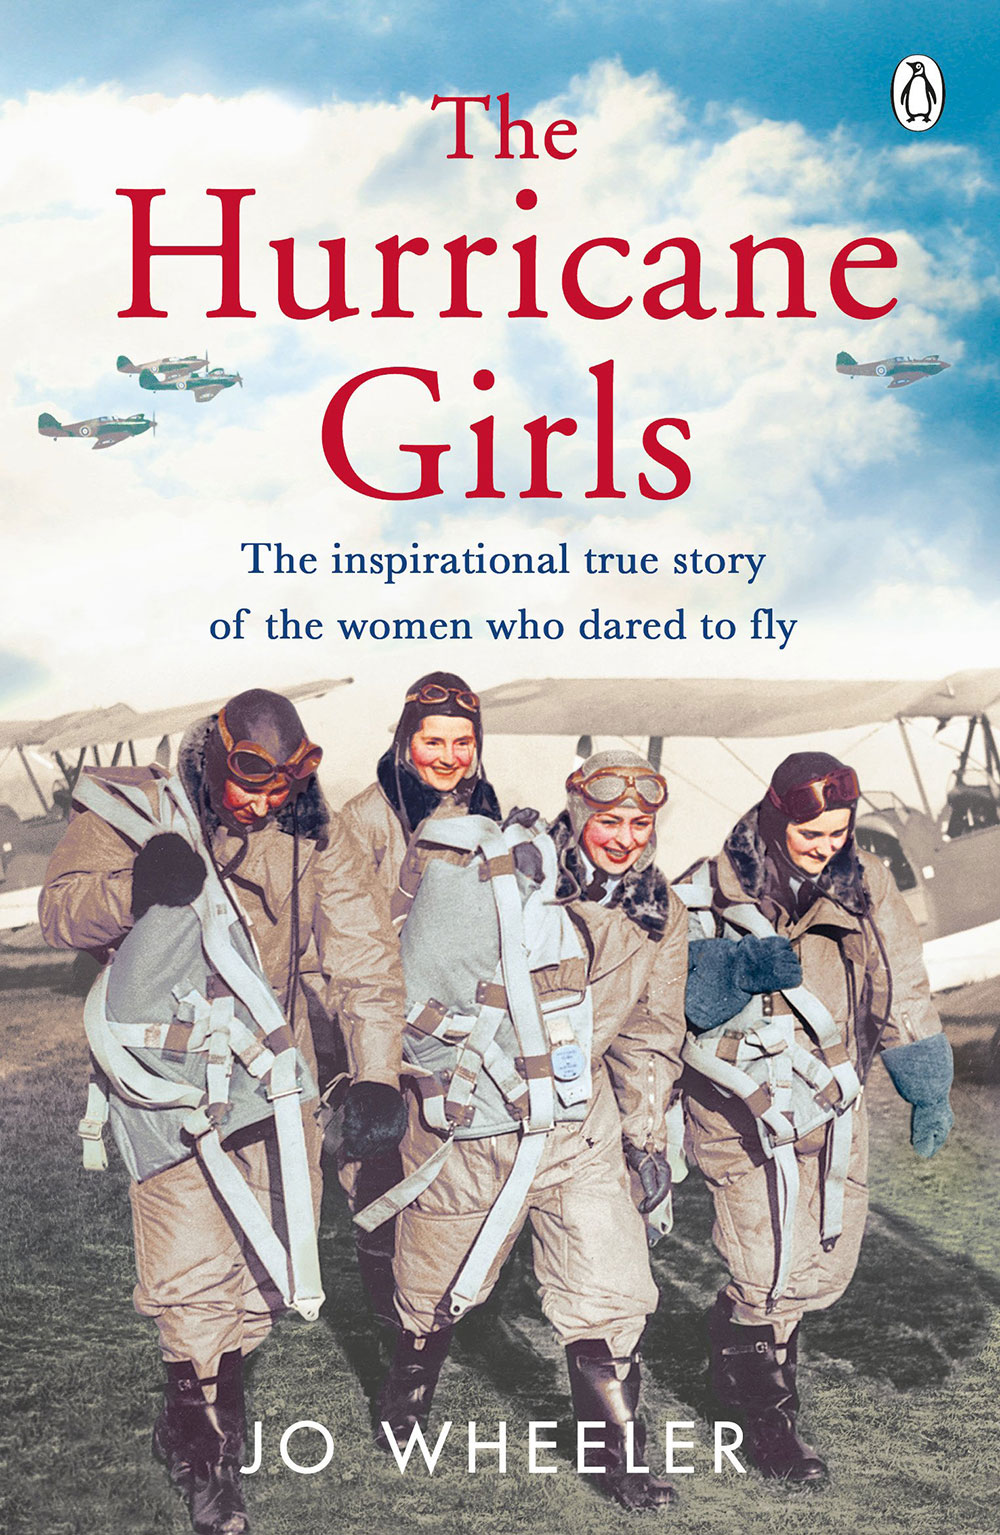 Cover of 'The Hurricane Girls': Four women pilots walking arm in arm in front of their planes.